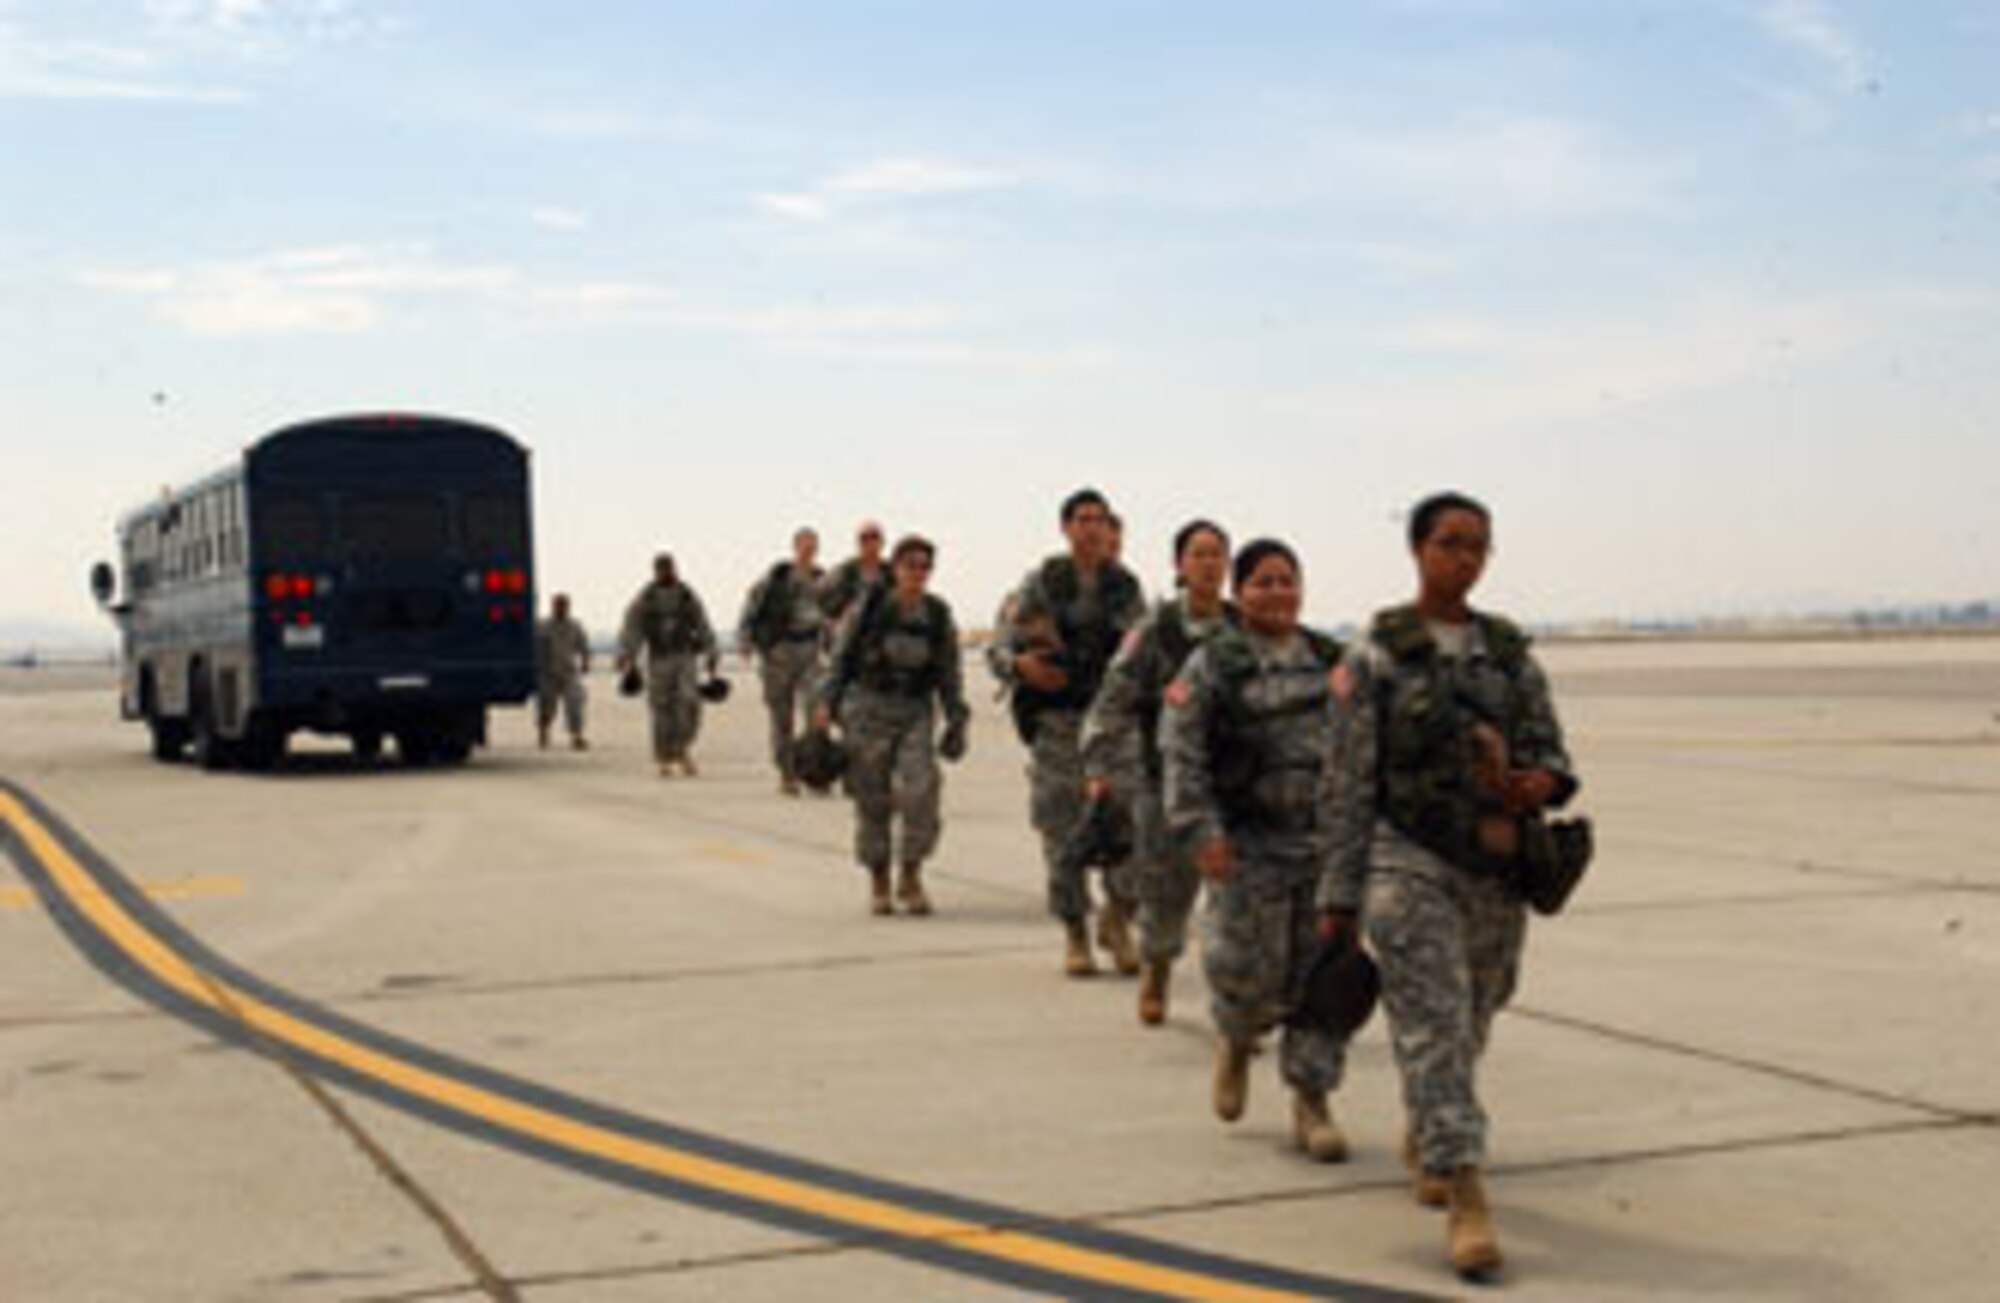 Soldiers from the Army’s 304th Sustainment Brigade stationed at March Air Reserve Base, Calif., get off a bus to board a C-17 Globemaster III that will take them to San Clemente Island to participate in exercise Patriot Hook. The five days of training took place at three California airfields and allowed military branches to come together to practice operational capabilities in a deployed setting.
U.S. Air Force photo by Senior Airman Sarah N. Sutliff